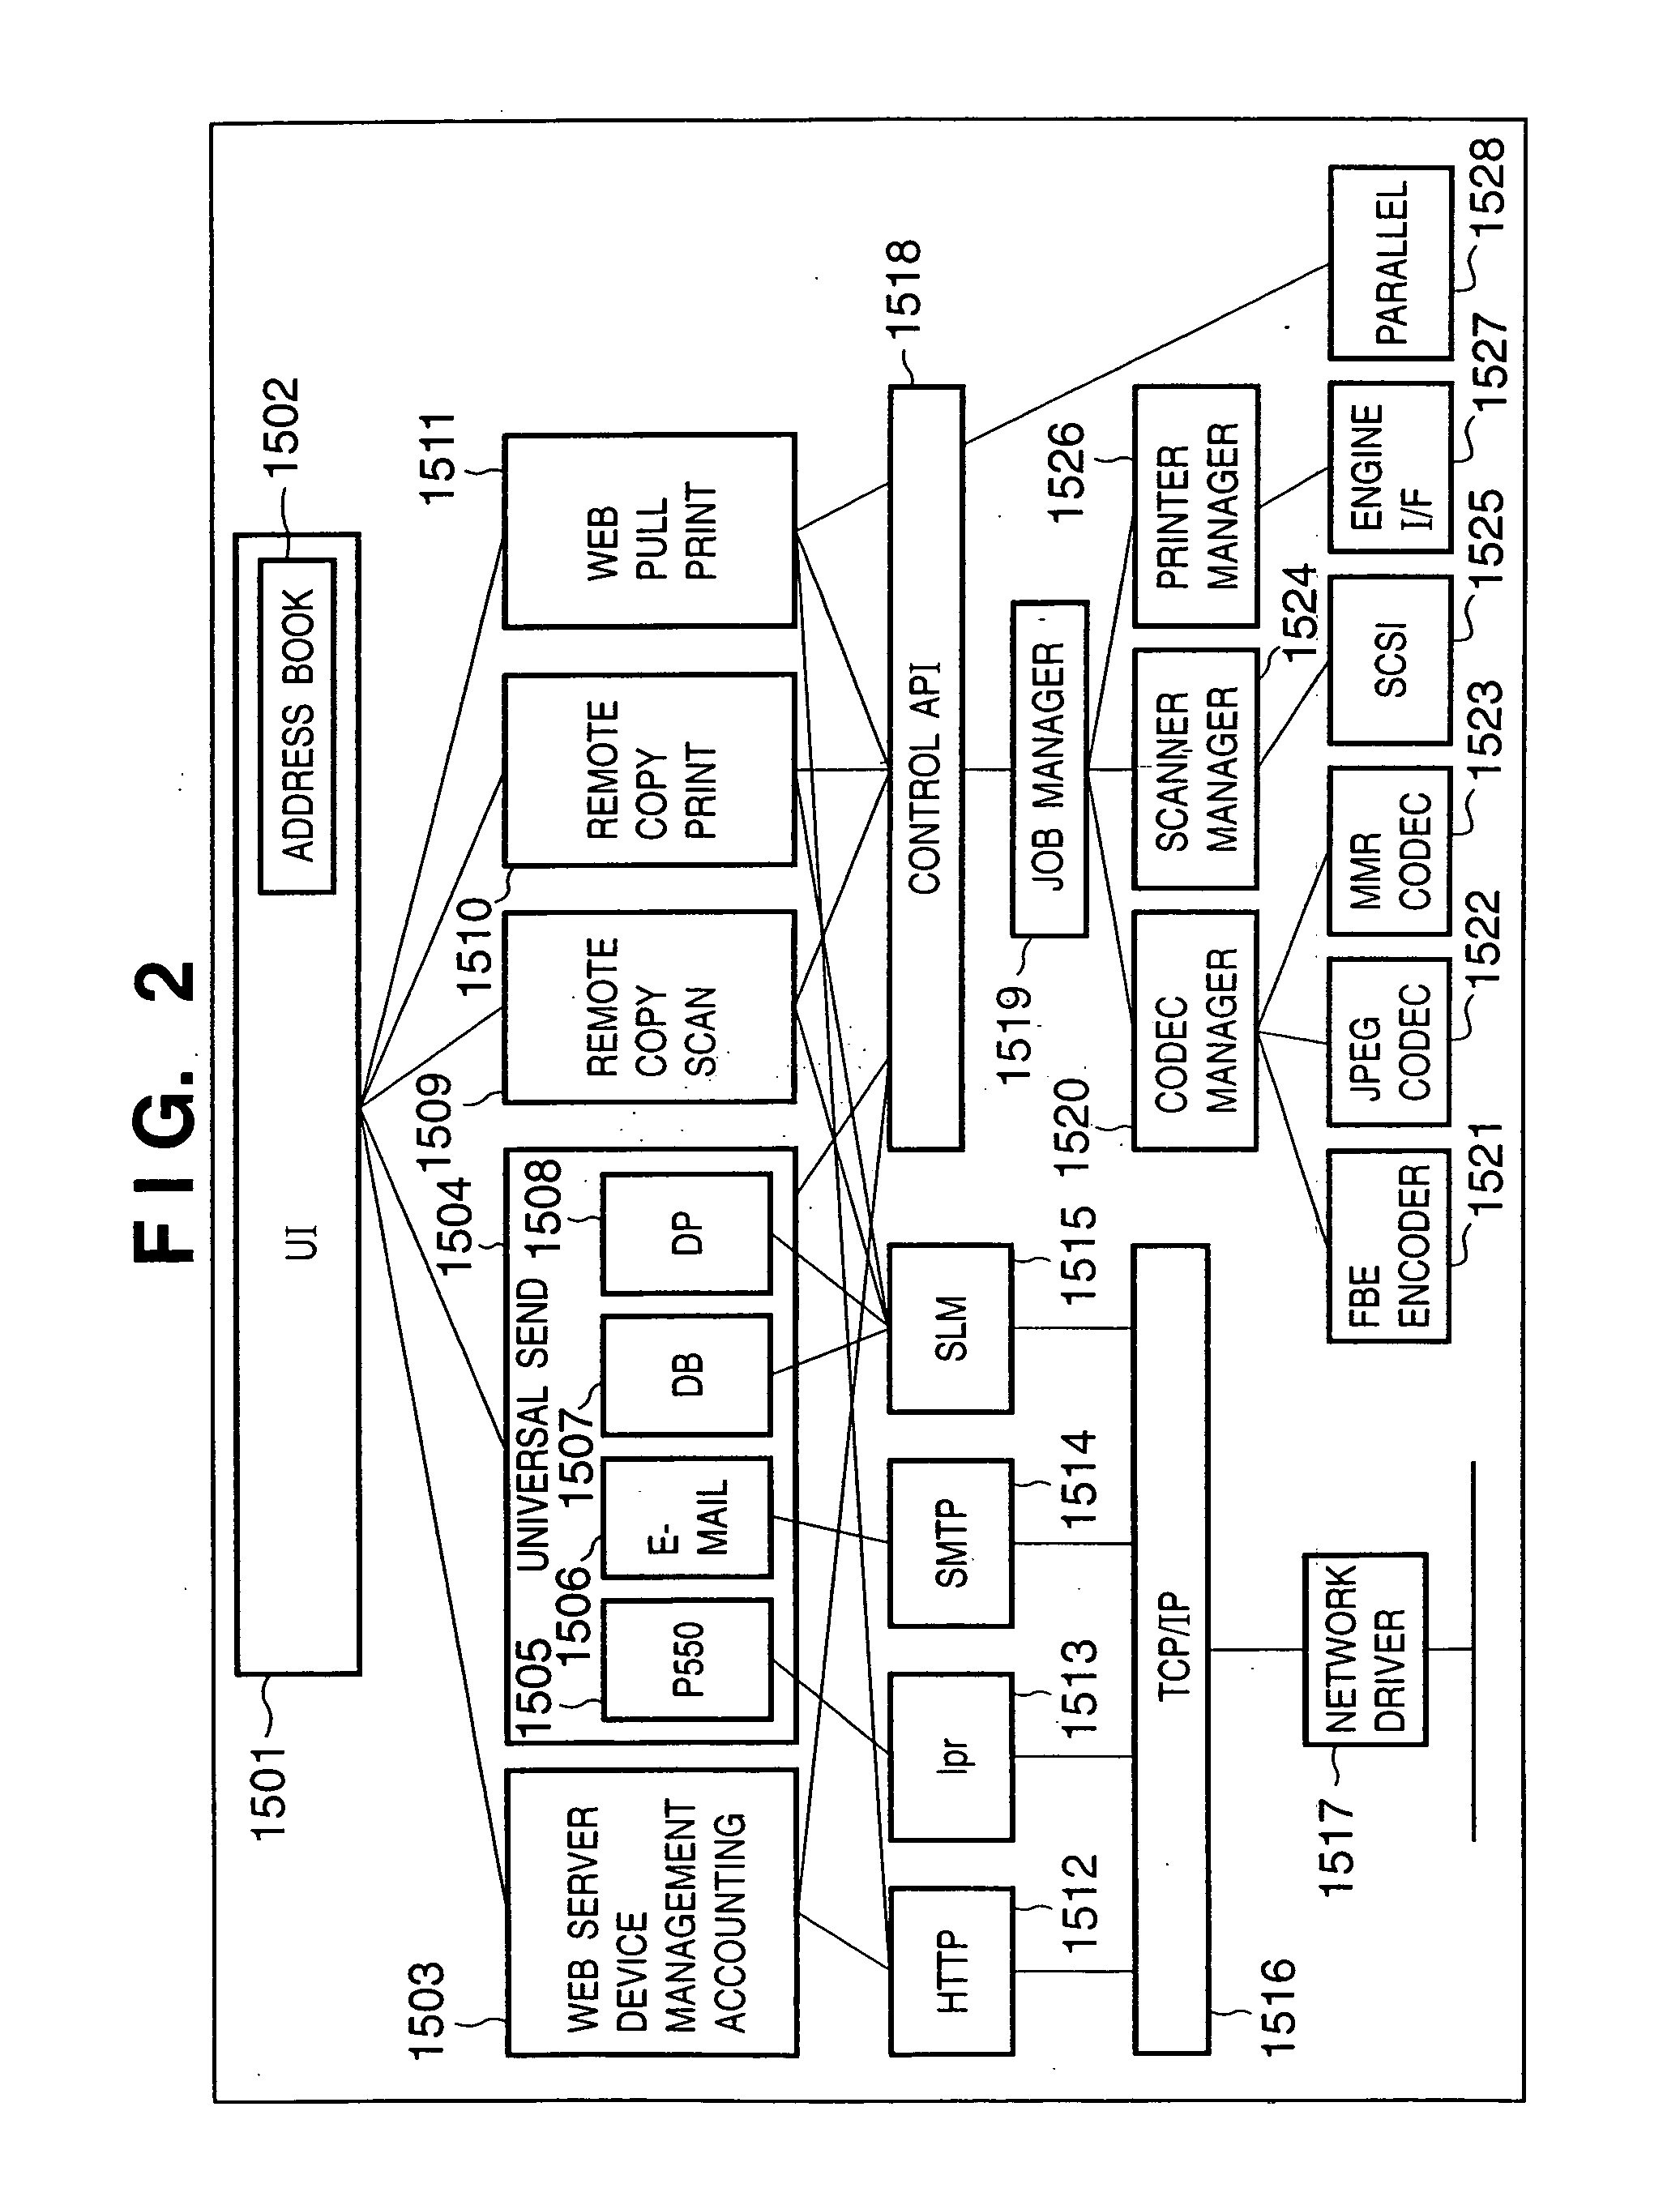 Control method for image processing apparatus connectable to computer network